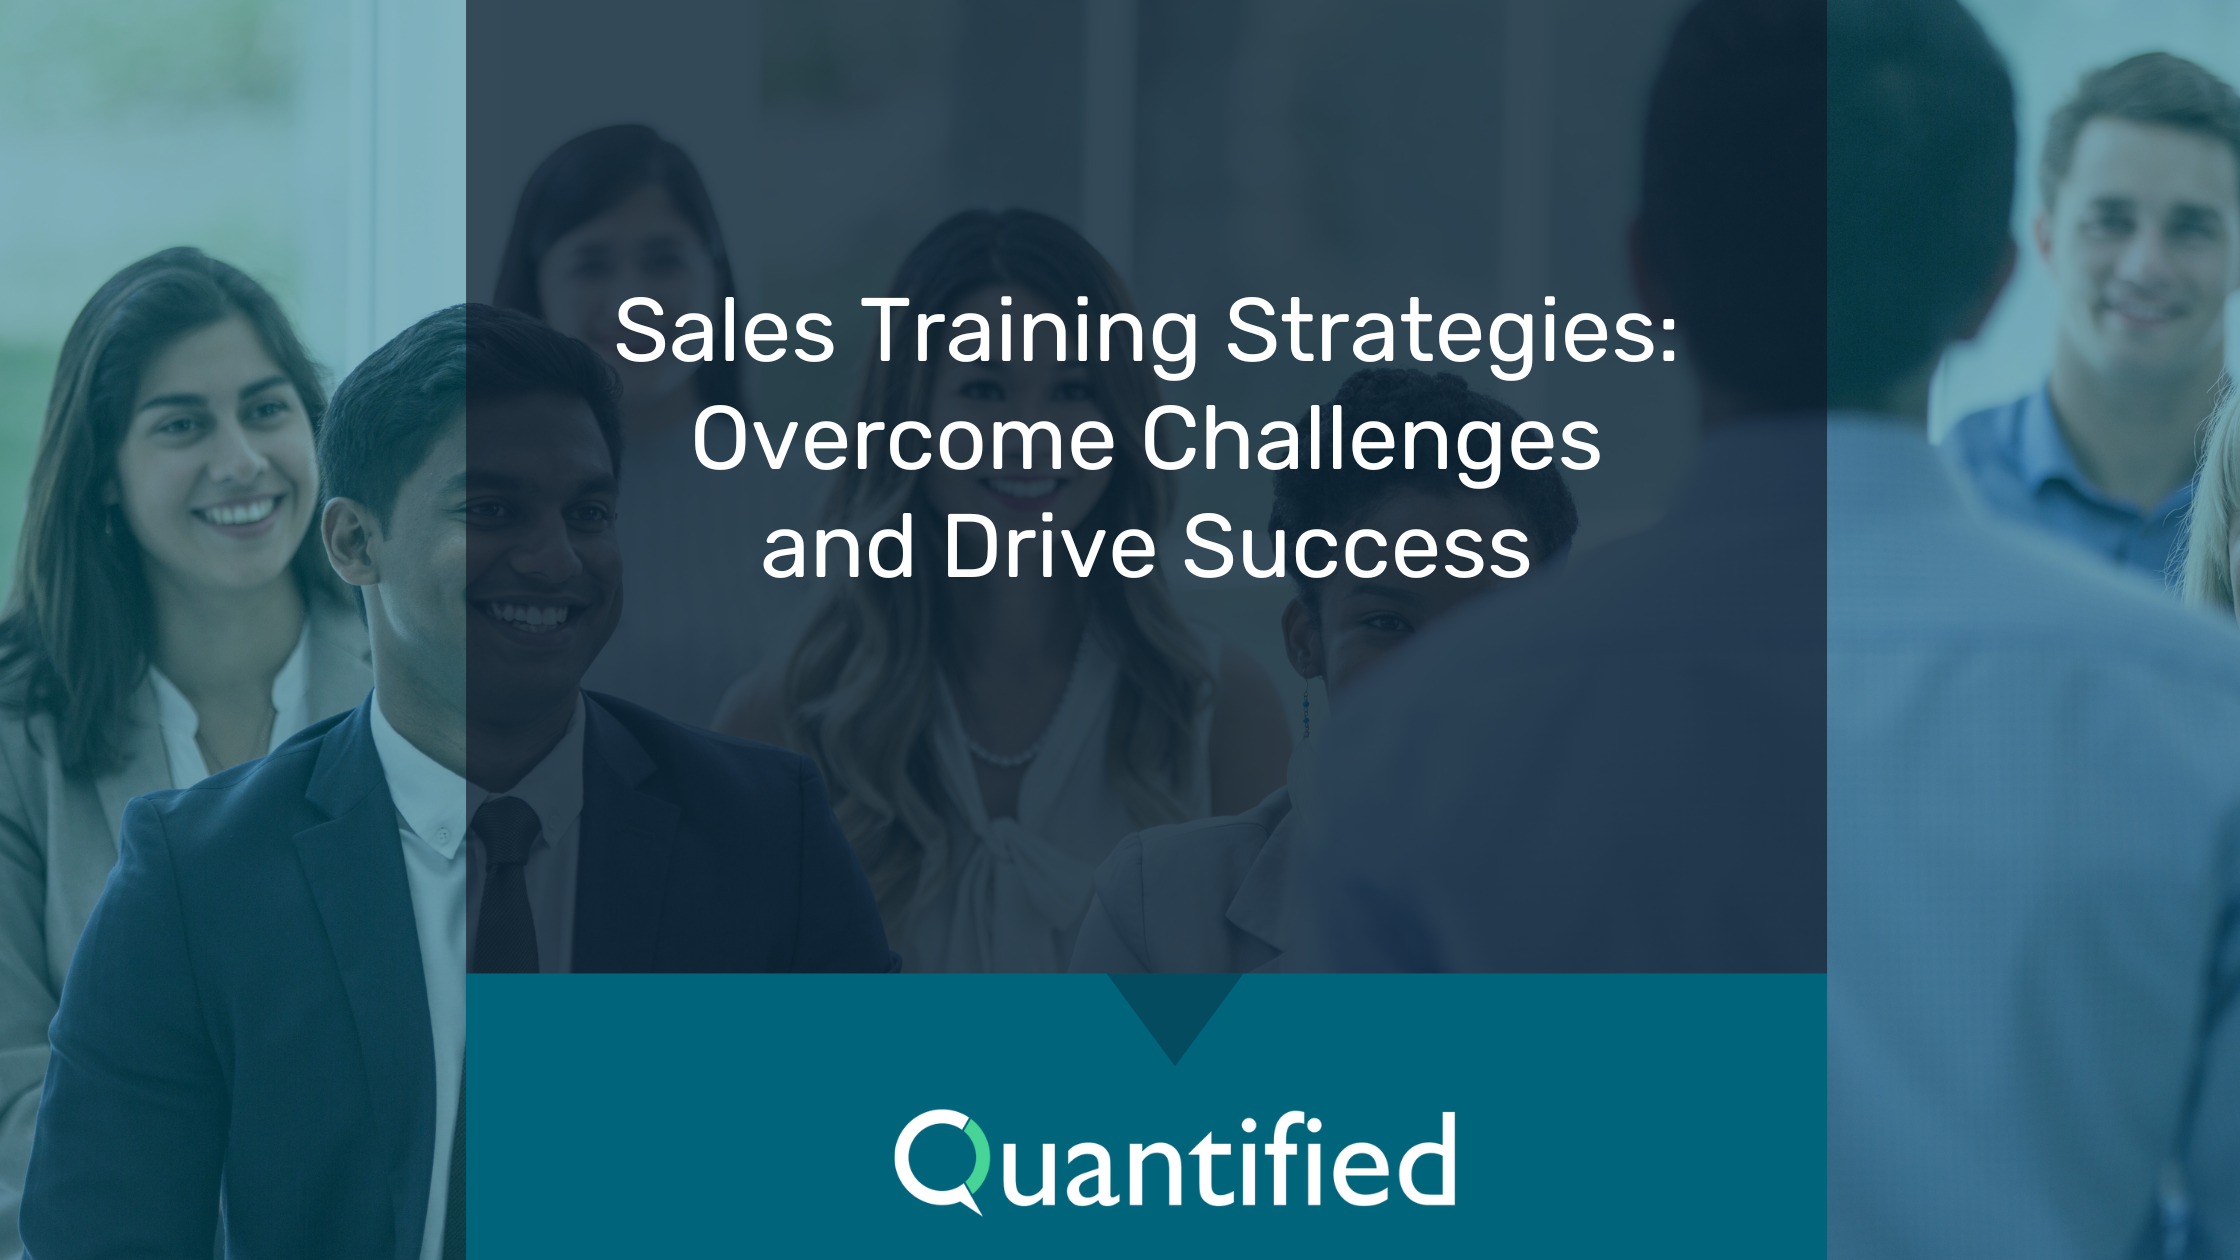 Sales Training Strategies: Overcome Challenges and Drive Success